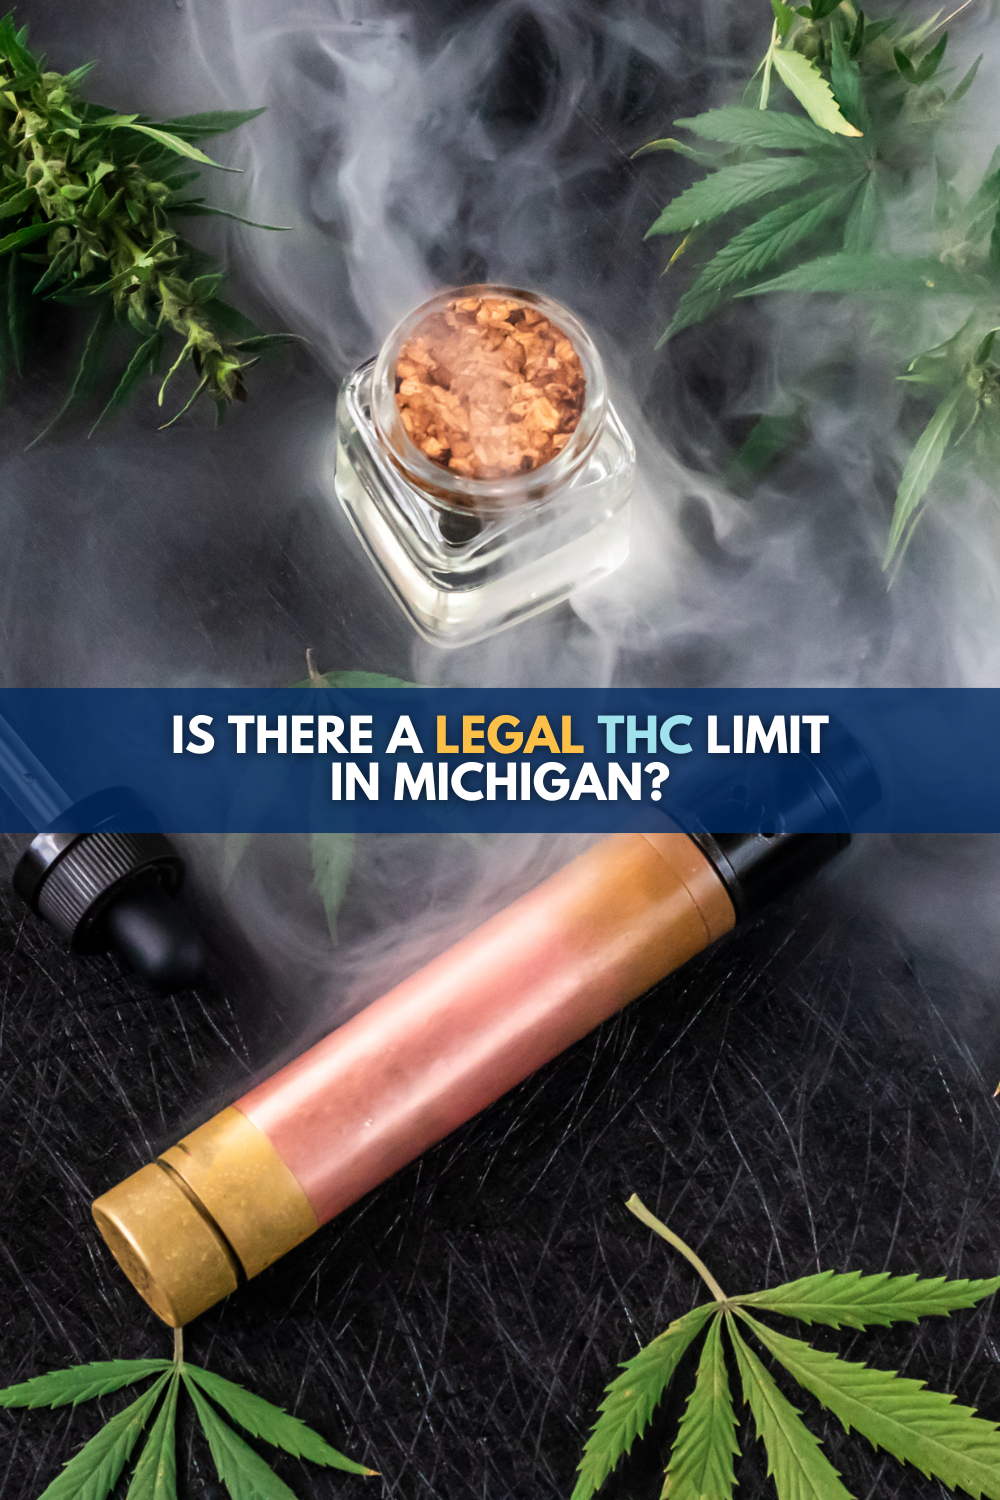 Legal THC Limit in Michigan: Is There One That Proves Marijuana-Impaired Driving?